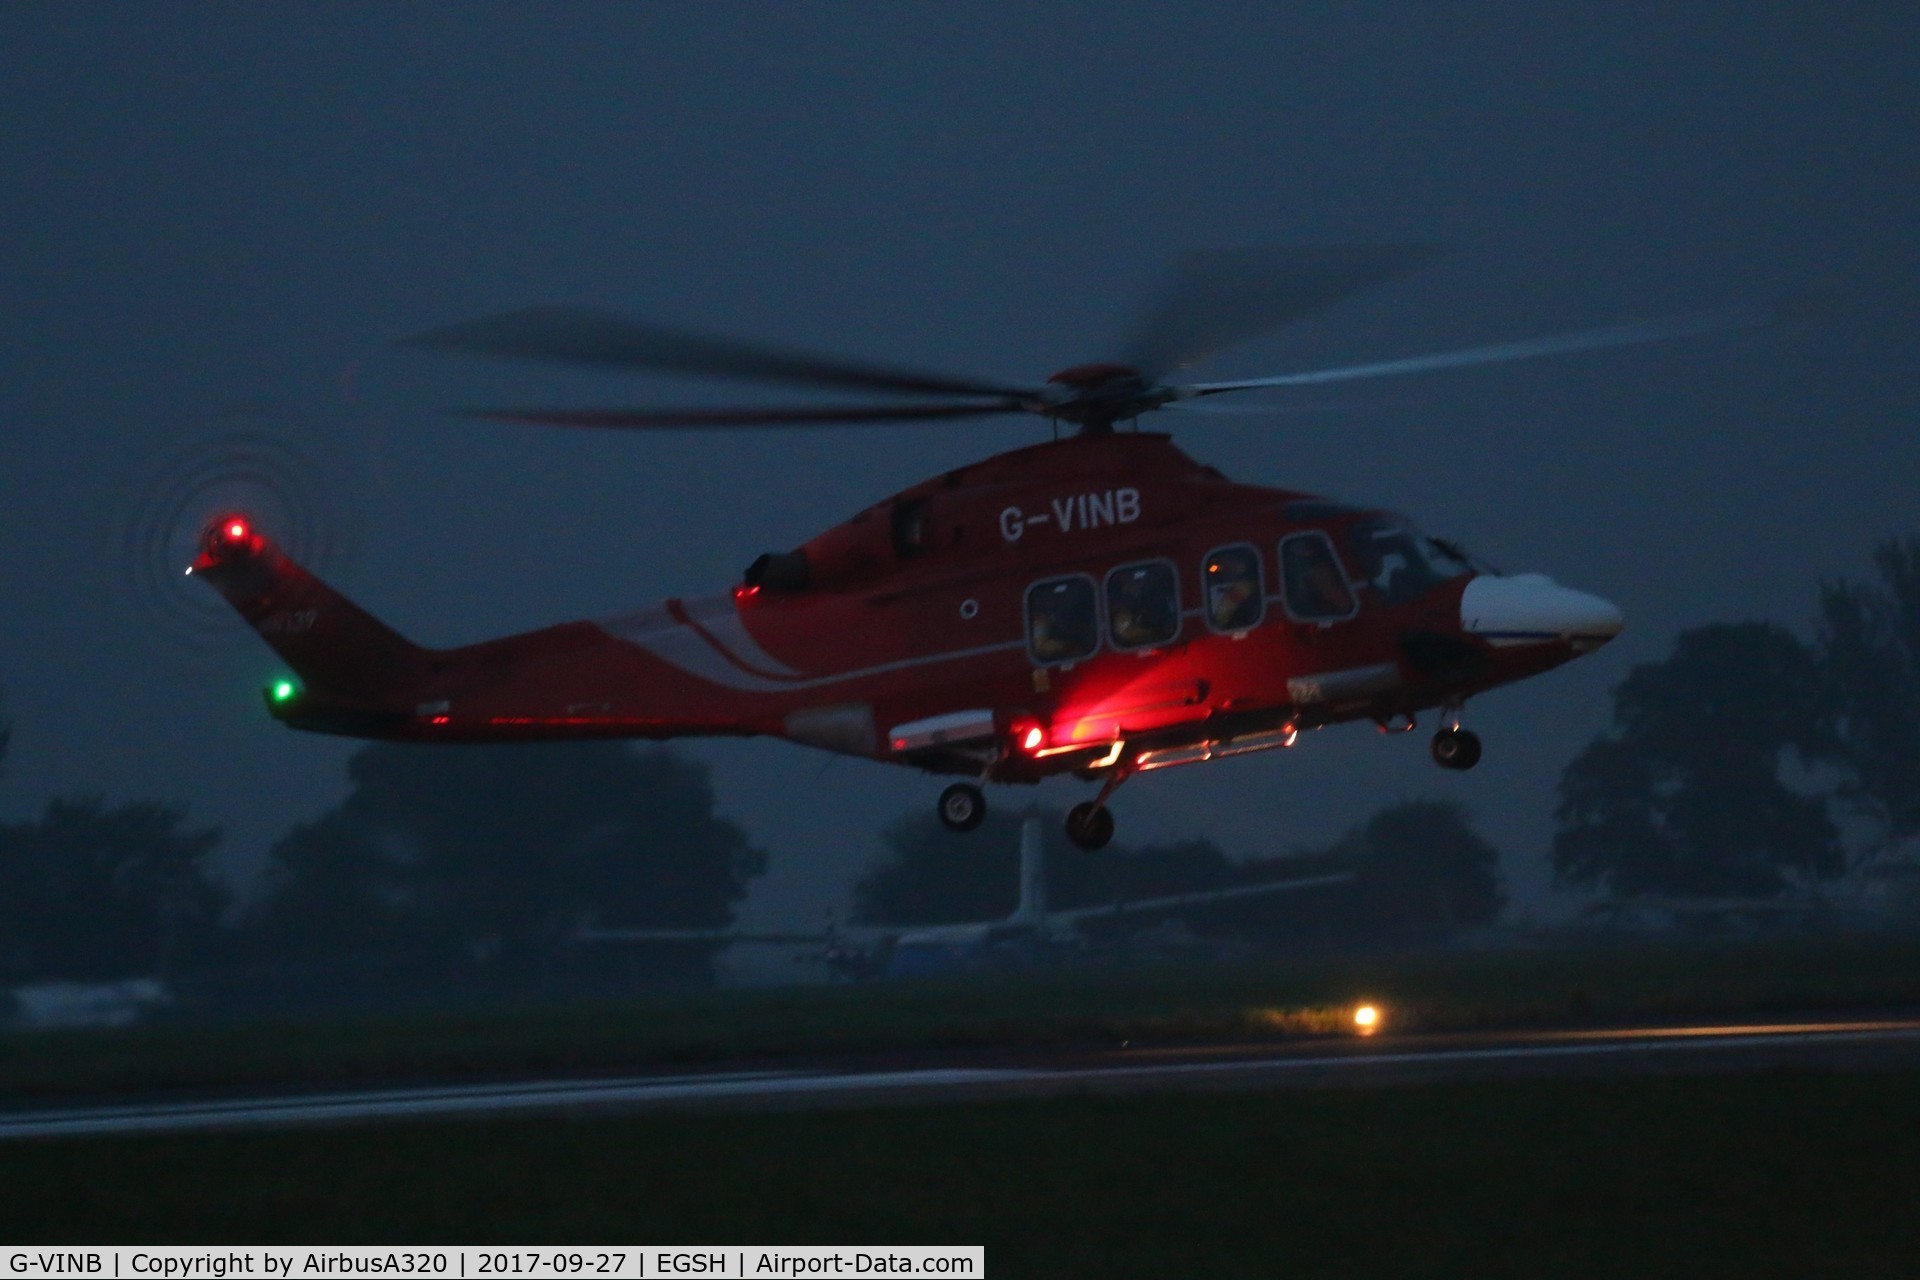 G-VINB, 2012 AgustaWestland AW-139 C/N 31398, Still wearing spare white nose coming into land end of another day